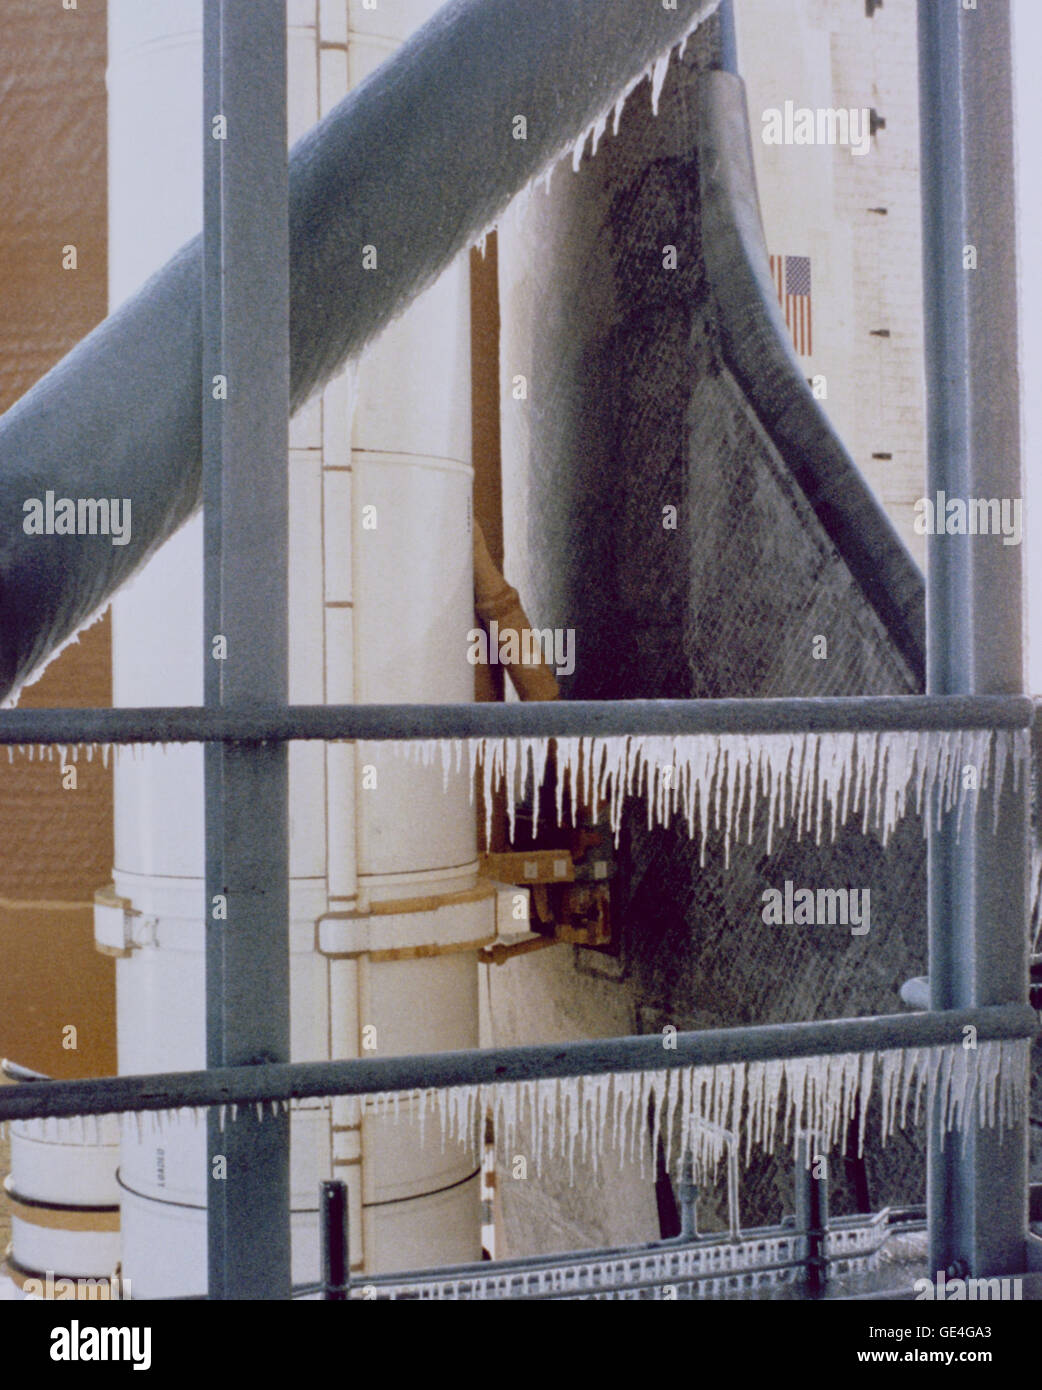 Icicles formed on the launch pad and service tower in the evening and early morning hours on January 28, 1986. When it was determined that air temperatures combined with wind speeds were going to cause freezing conditions, a decision was made to leave all water supply lines on slow &quot;trickle&quot; to prevent line burst. This action resulted in a surreal scene for the Florida launch facility.   Date: January 28, 1986 Stock Photo